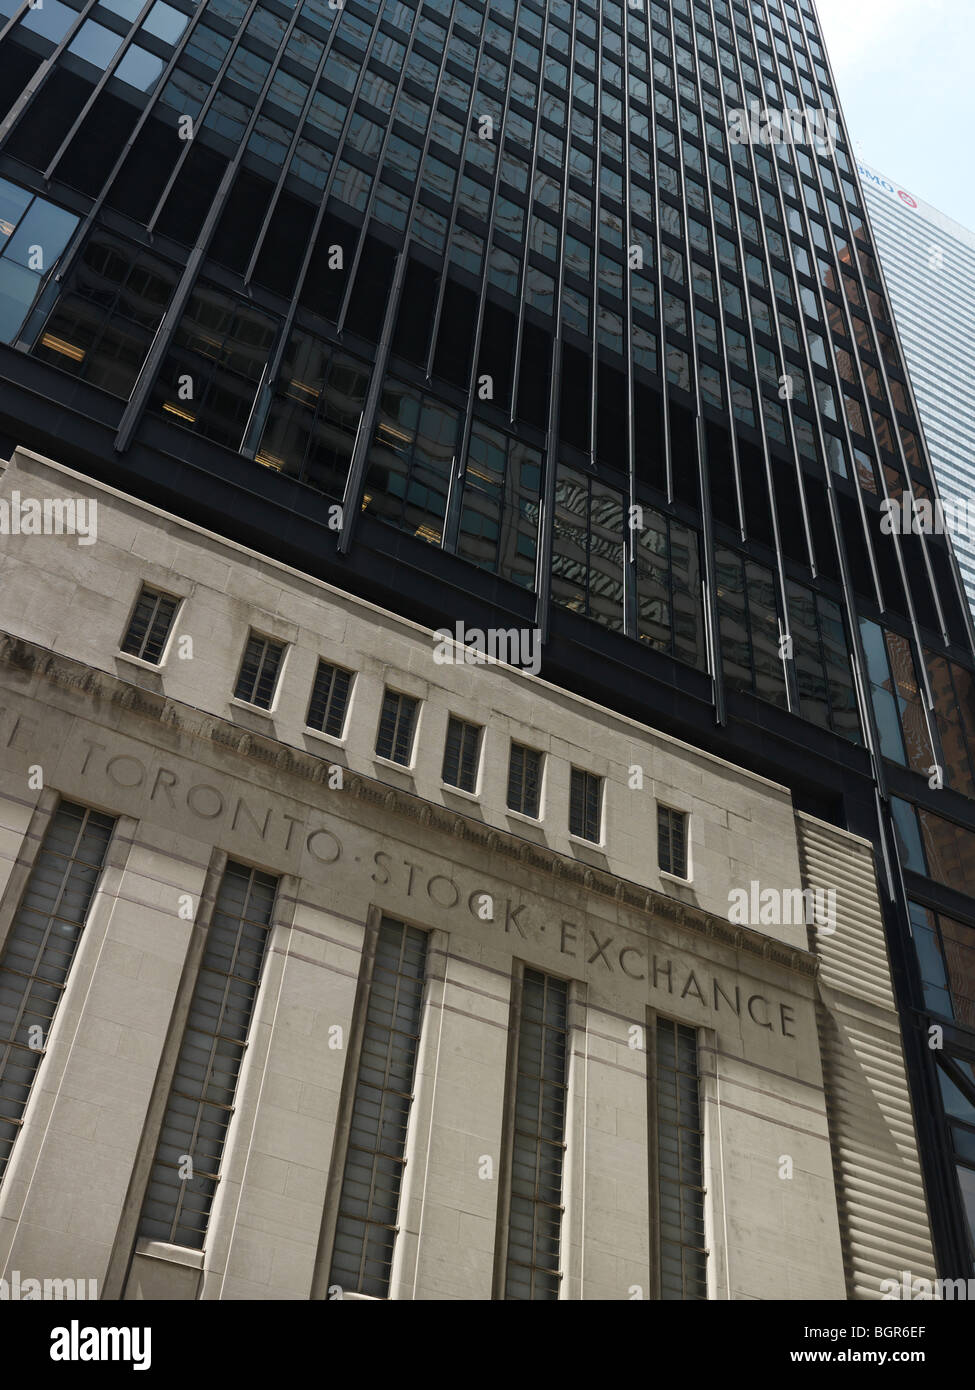 The Toronto Stock Exchange building facade and the Toronto Dominion Centre tower built above it Stock Photo